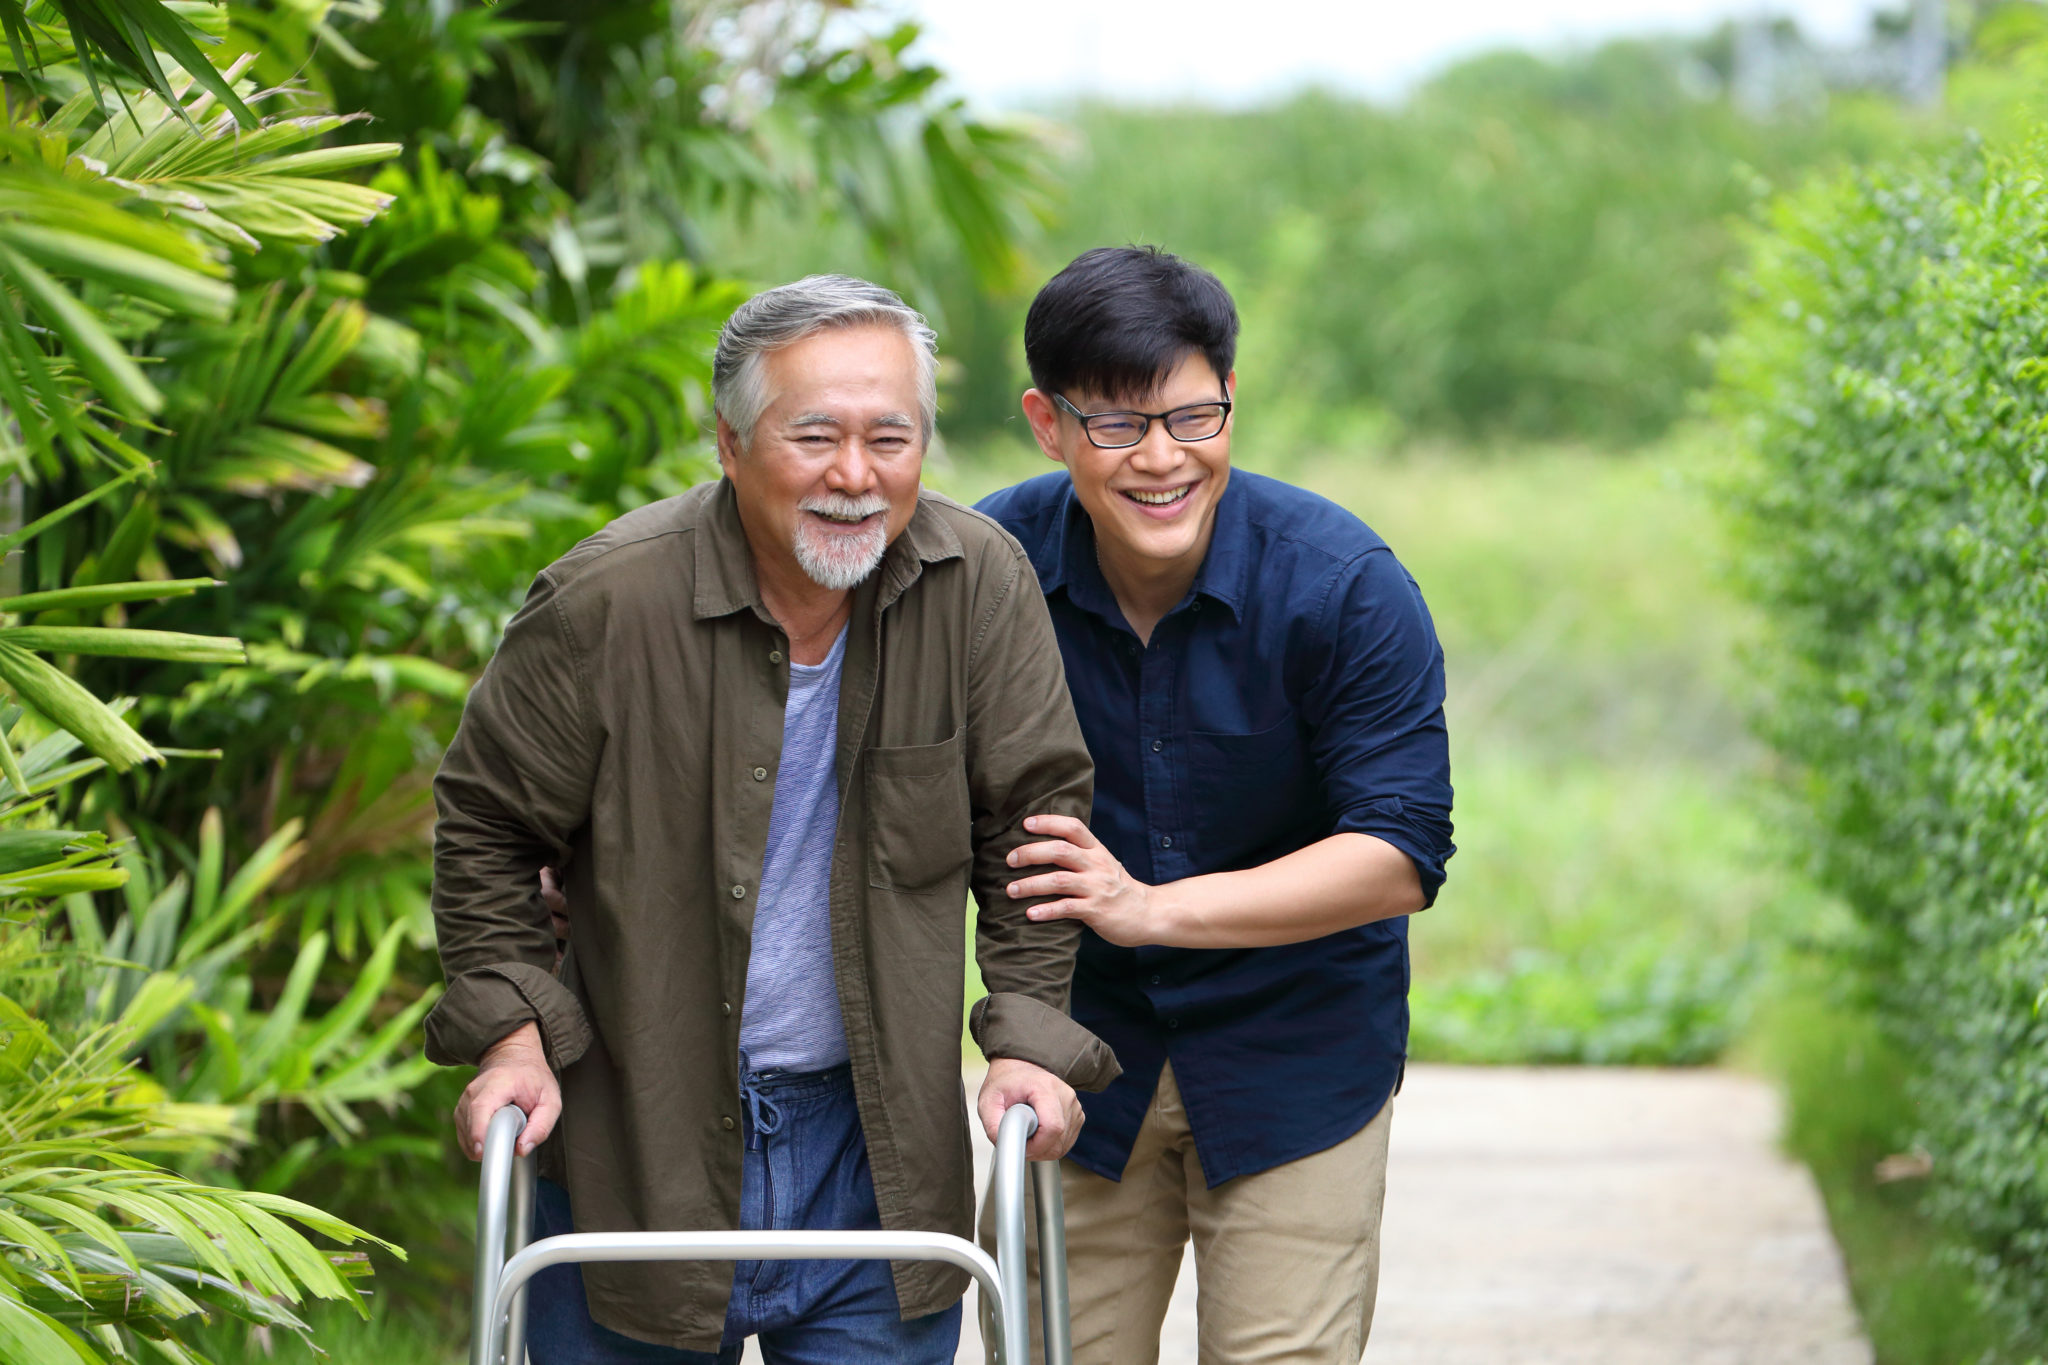 Happy elder Asian man using walker while walking for exercise around the garden with his son taking care of him at the retirement age with copy space